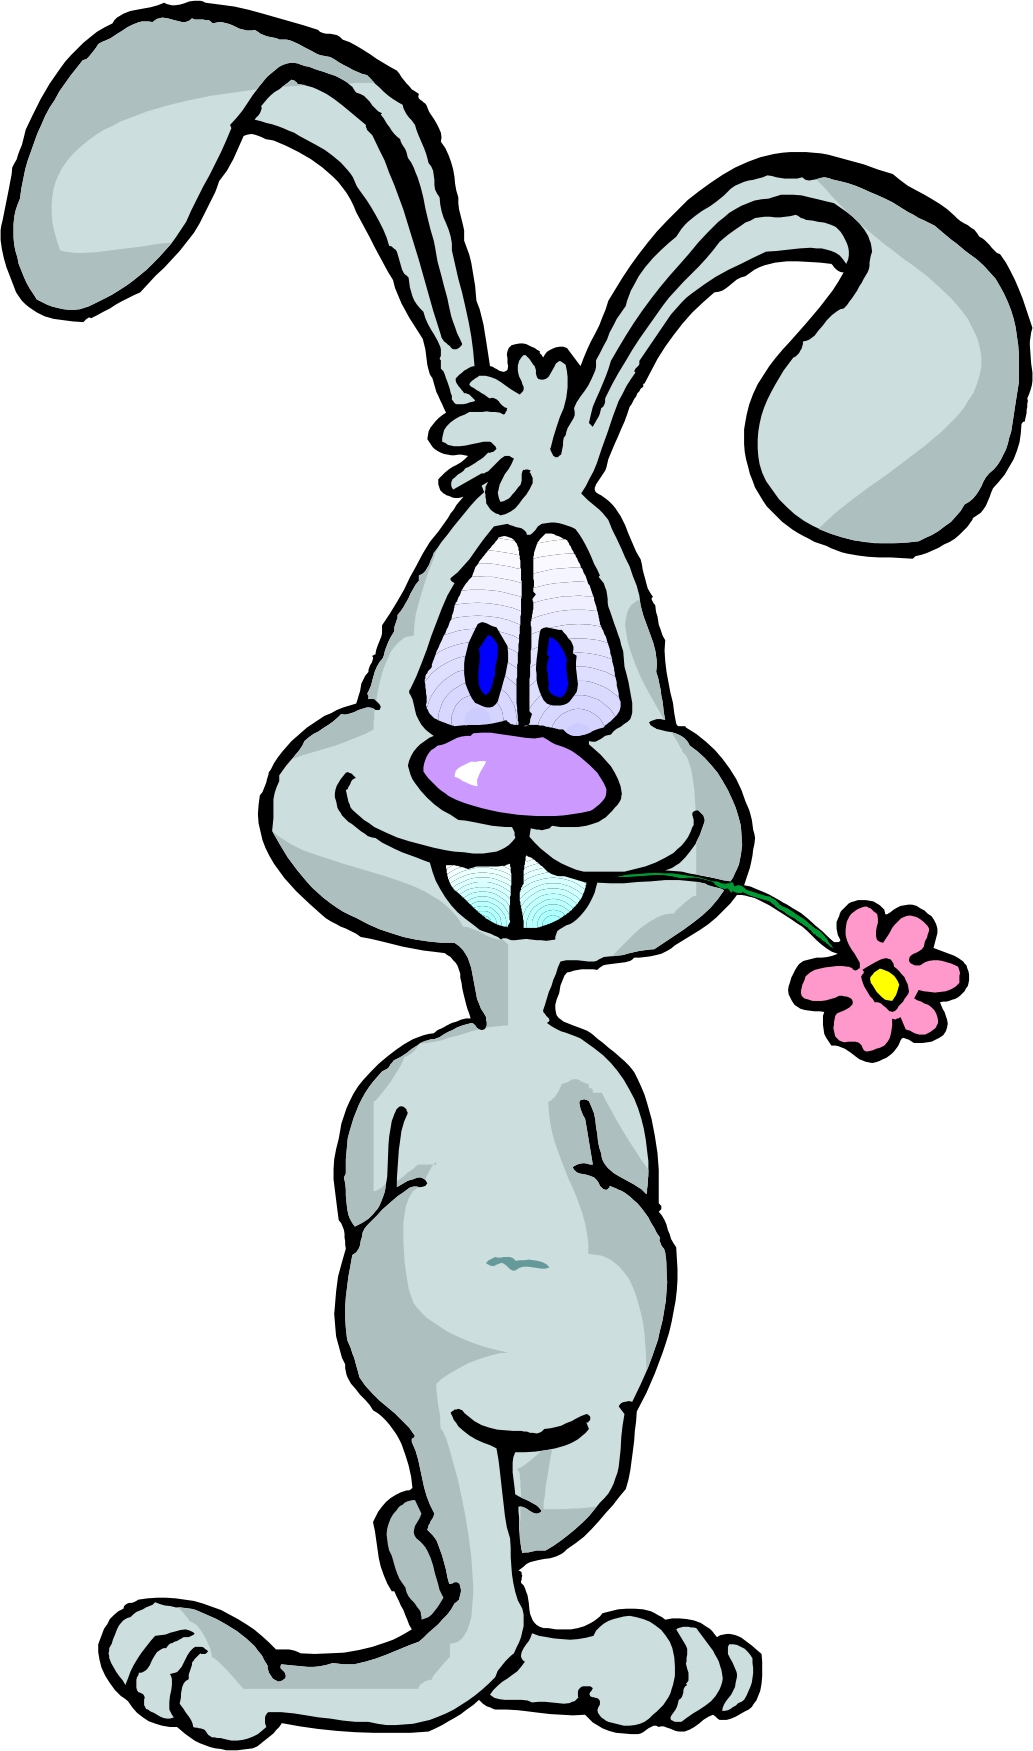 Cartoon Rabbit Image | Free download on ClipArtMag